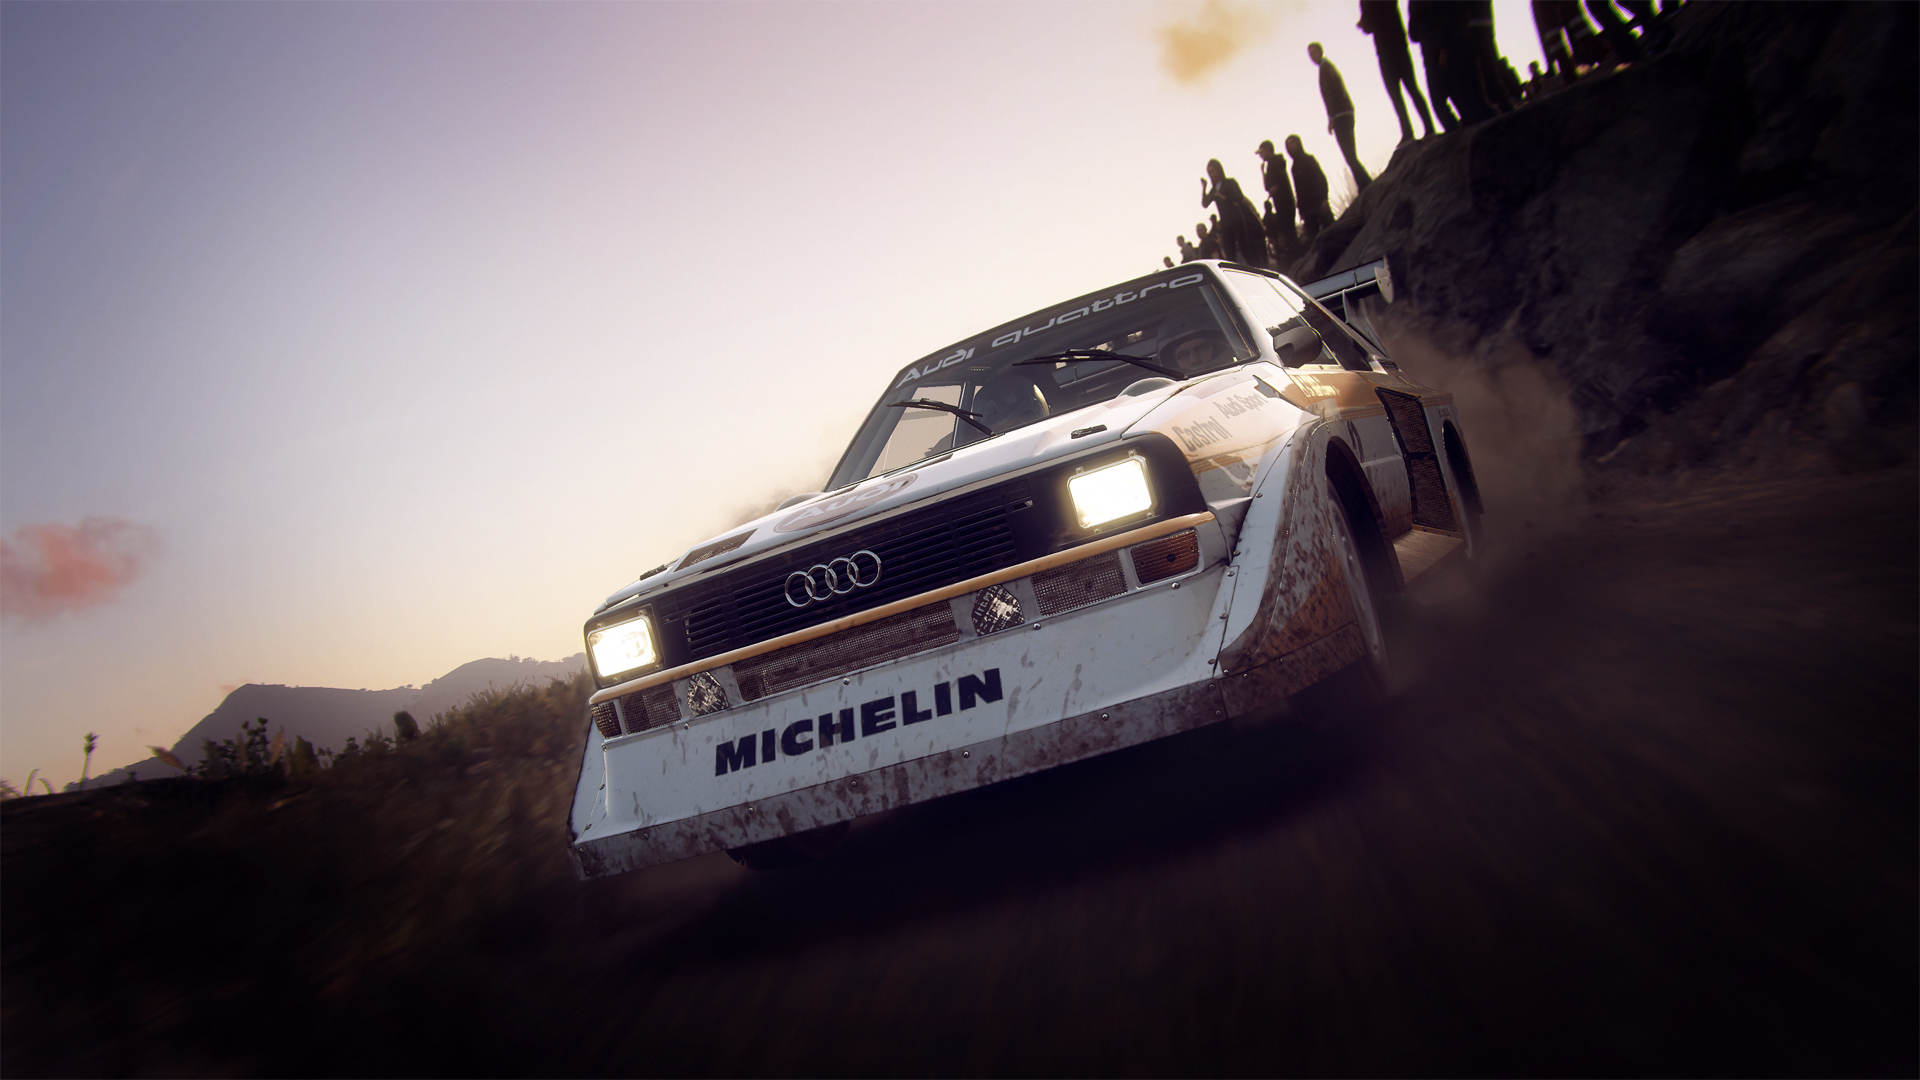 dirt rally 2.0 compatible vr